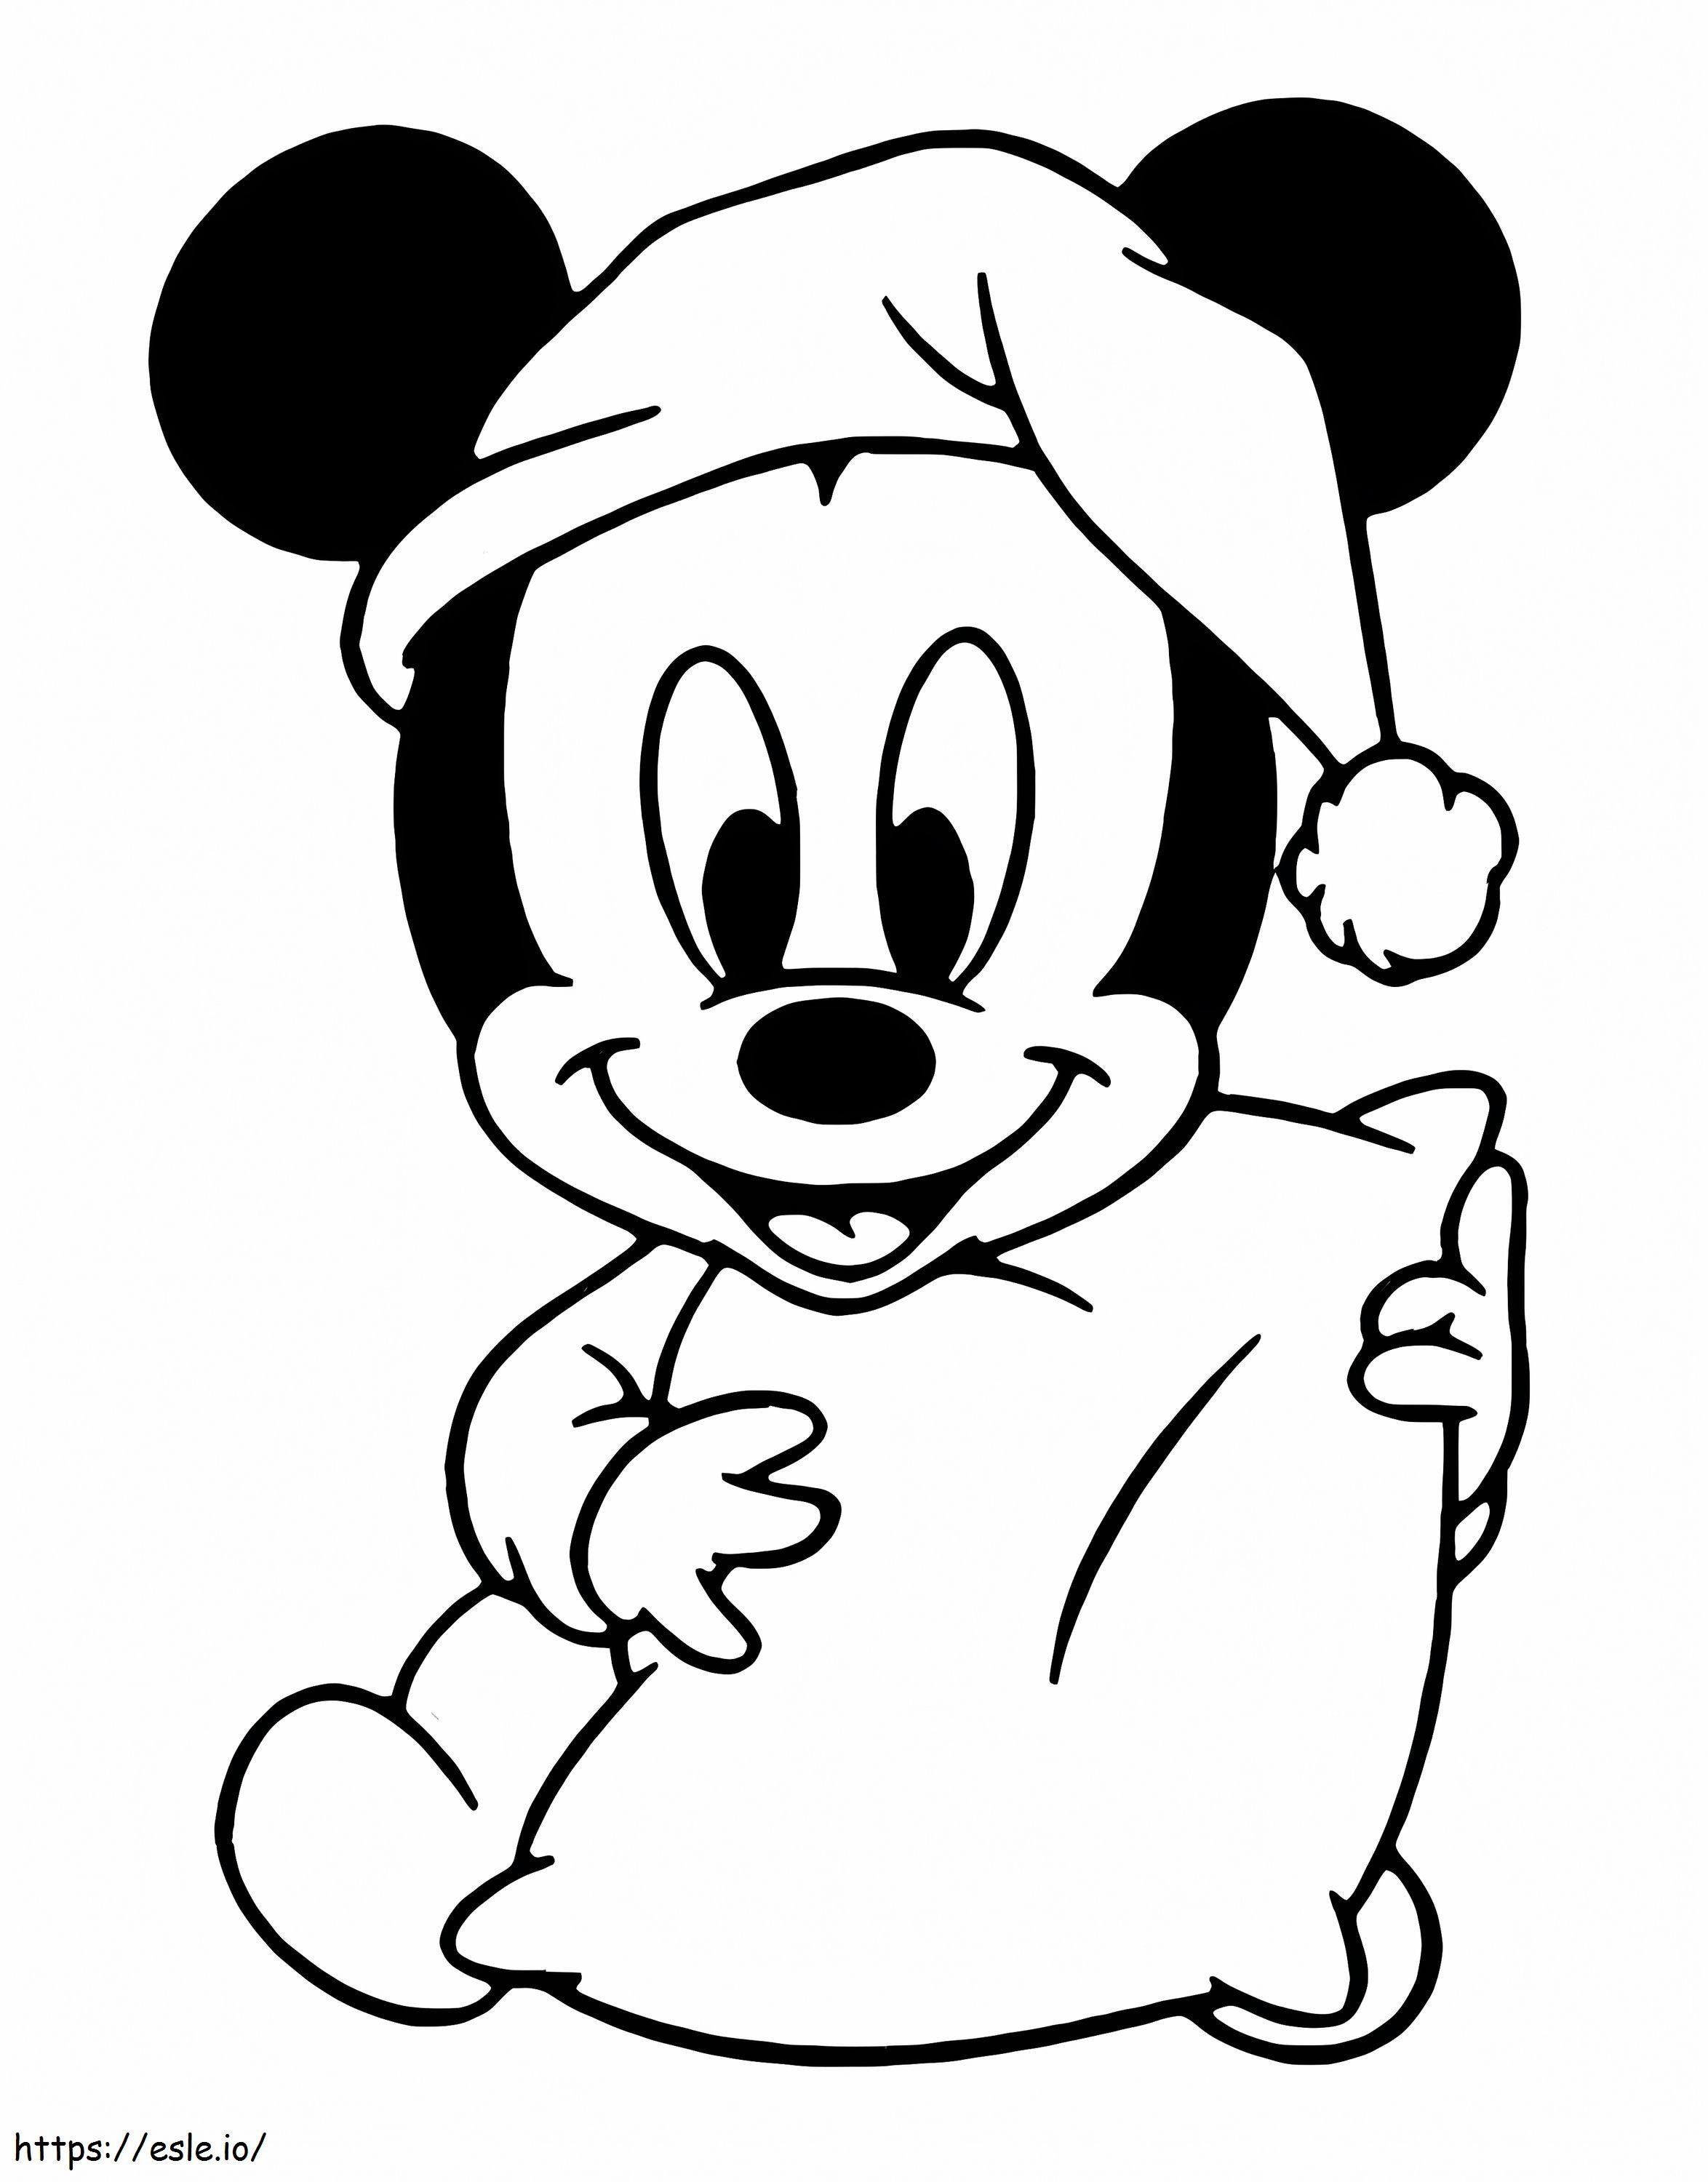 Funny Mickey Mouse Holding A Pillow coloring page